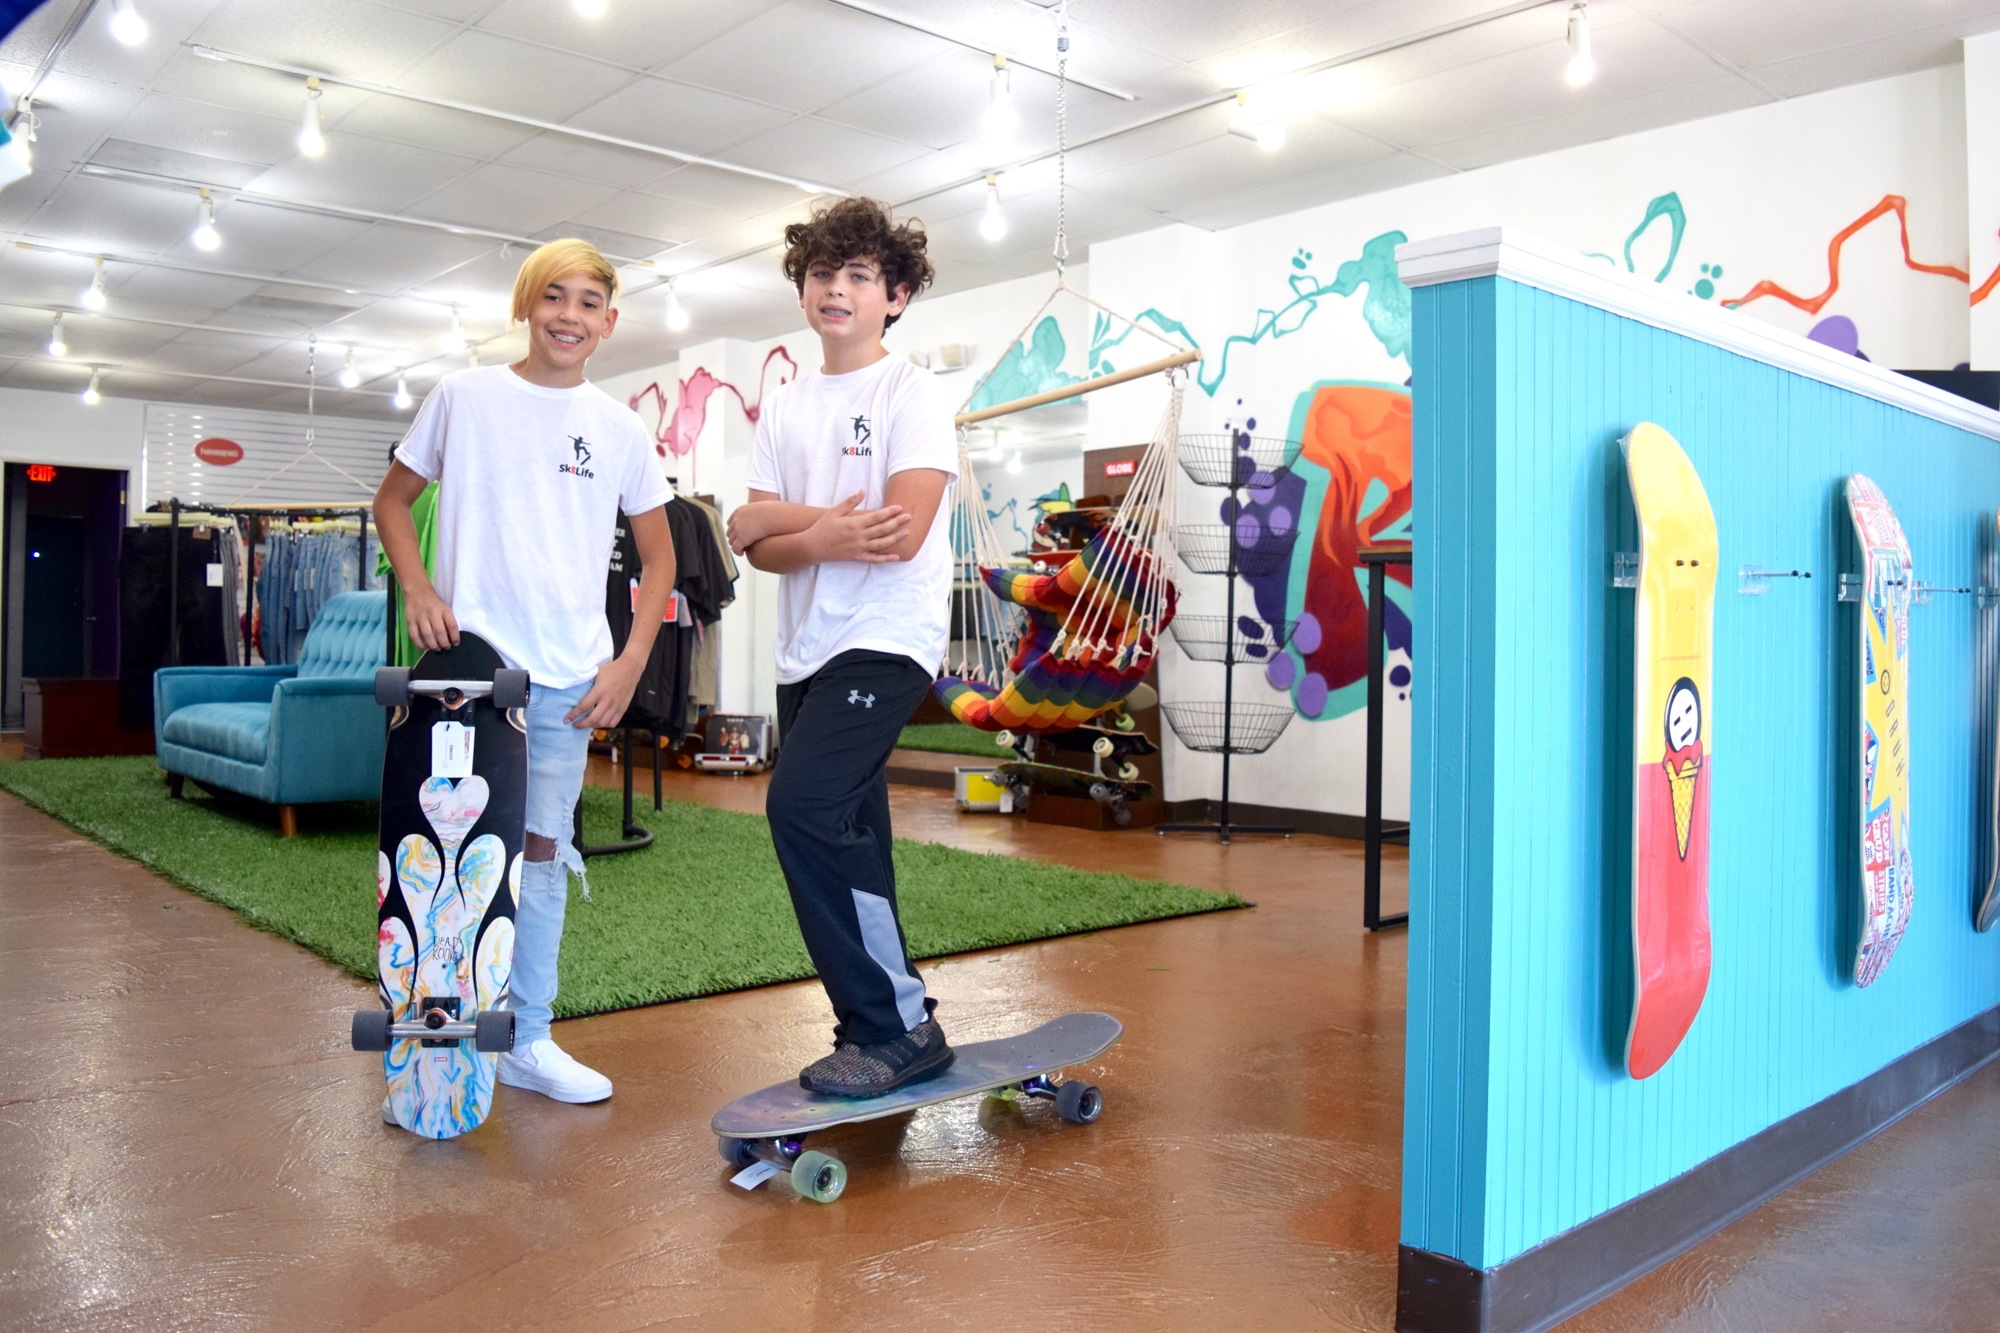 Miles Montenegro and his friend, Mason Moses, created their own T-shirt line that is featured at Showroom 11.